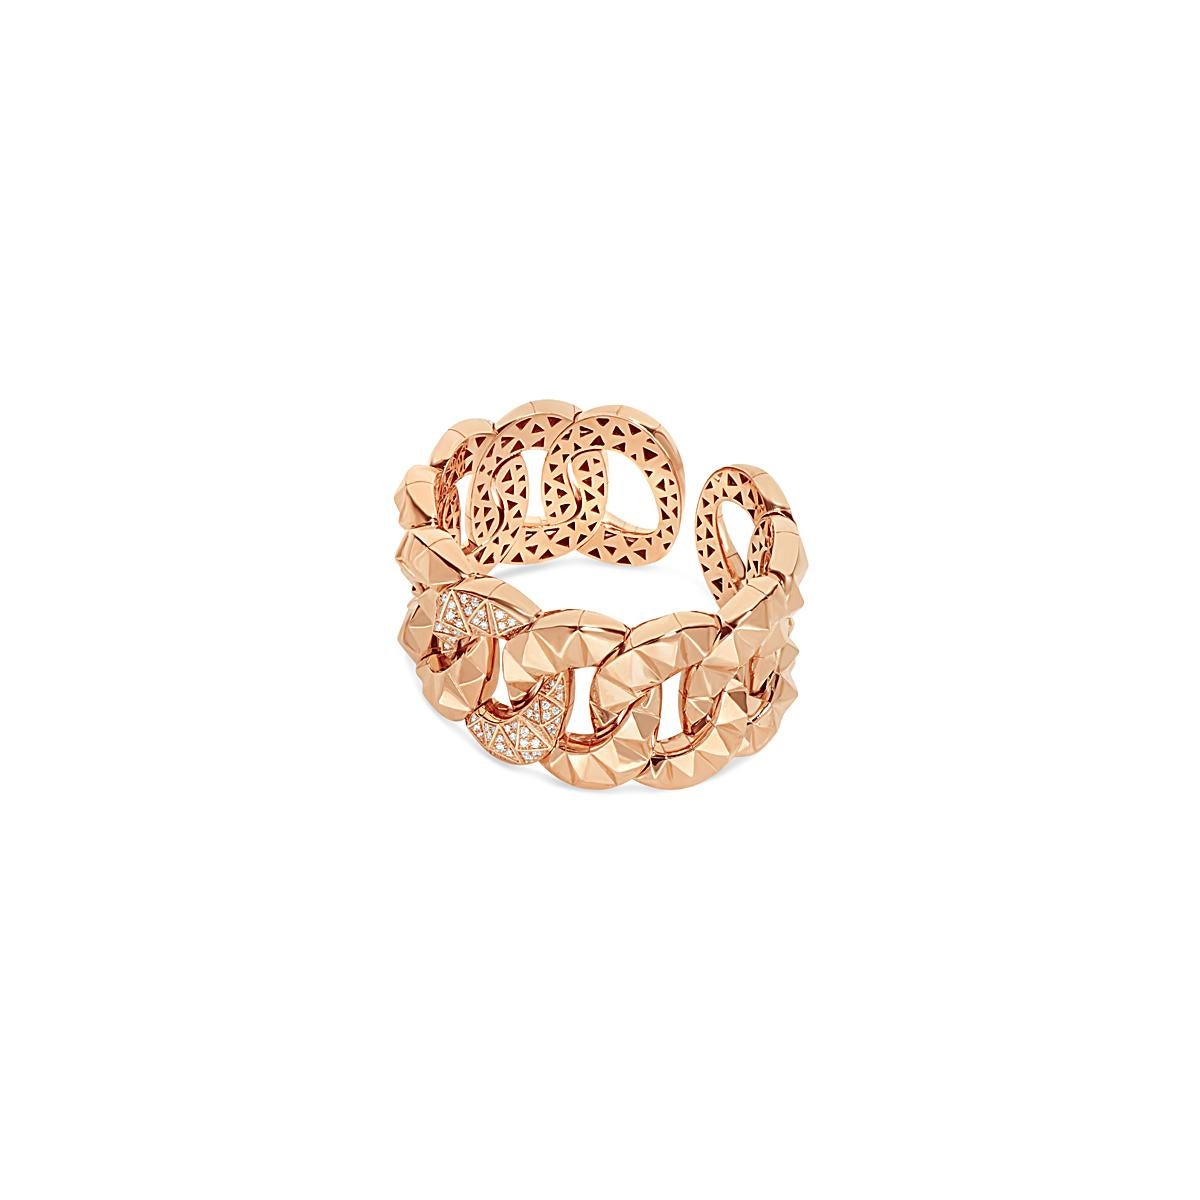 Gourgeous groumette bracelet, crafted in 18kt rose gold, features a sparkling pavè of white diamonds, which have been intricately handcrafted for flawless results. 
Suitable for sophisticated and strong women, this cuff bracelet becomes a unique